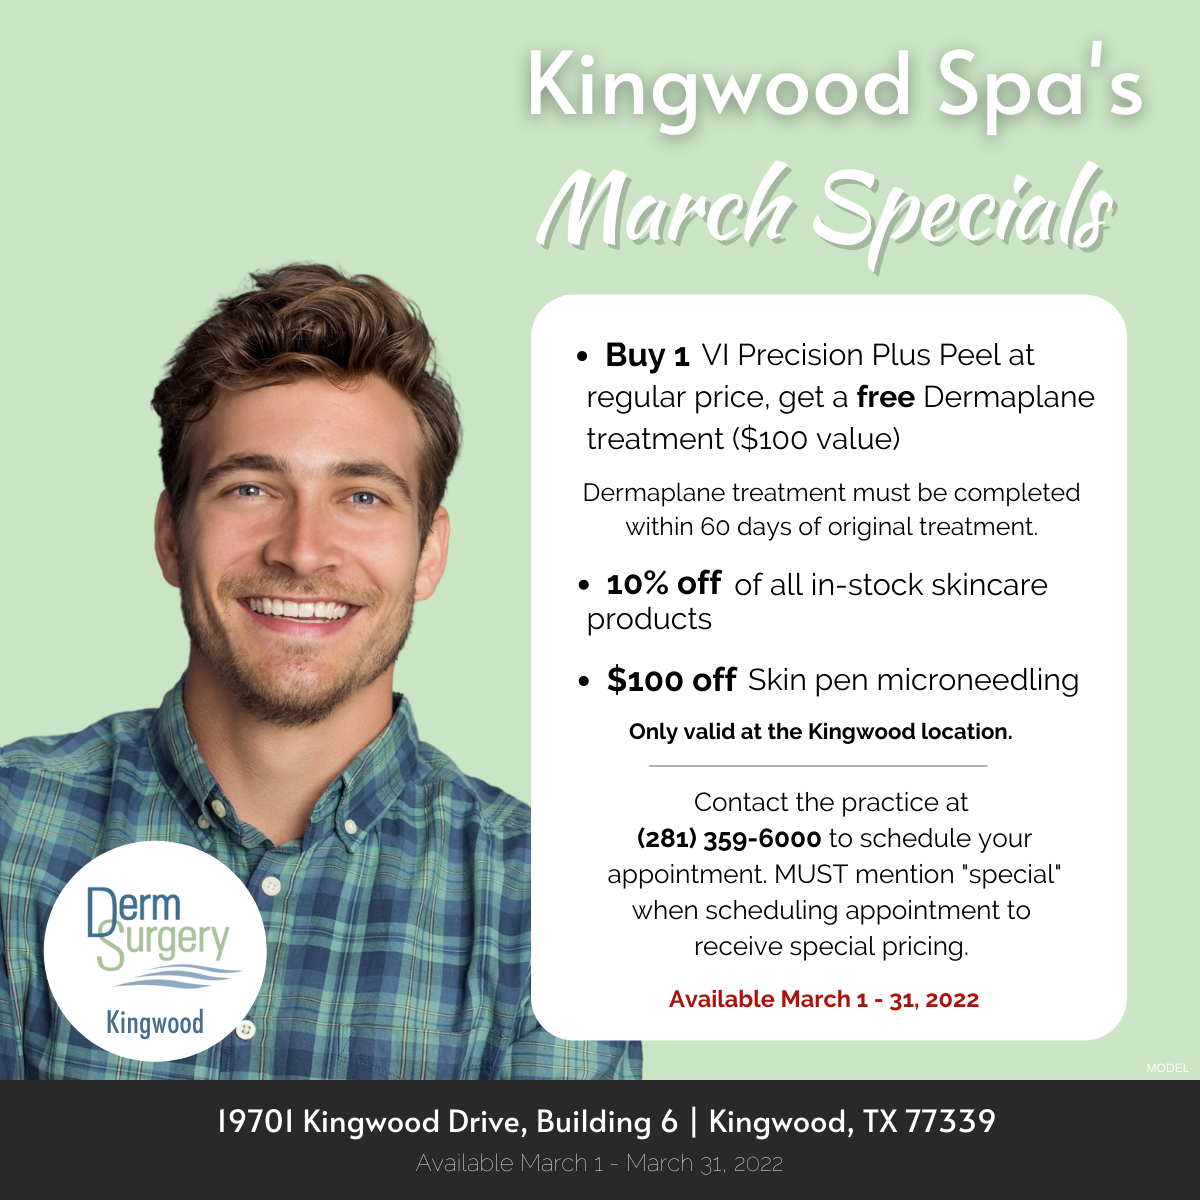 Kingwood Spa's March Specials